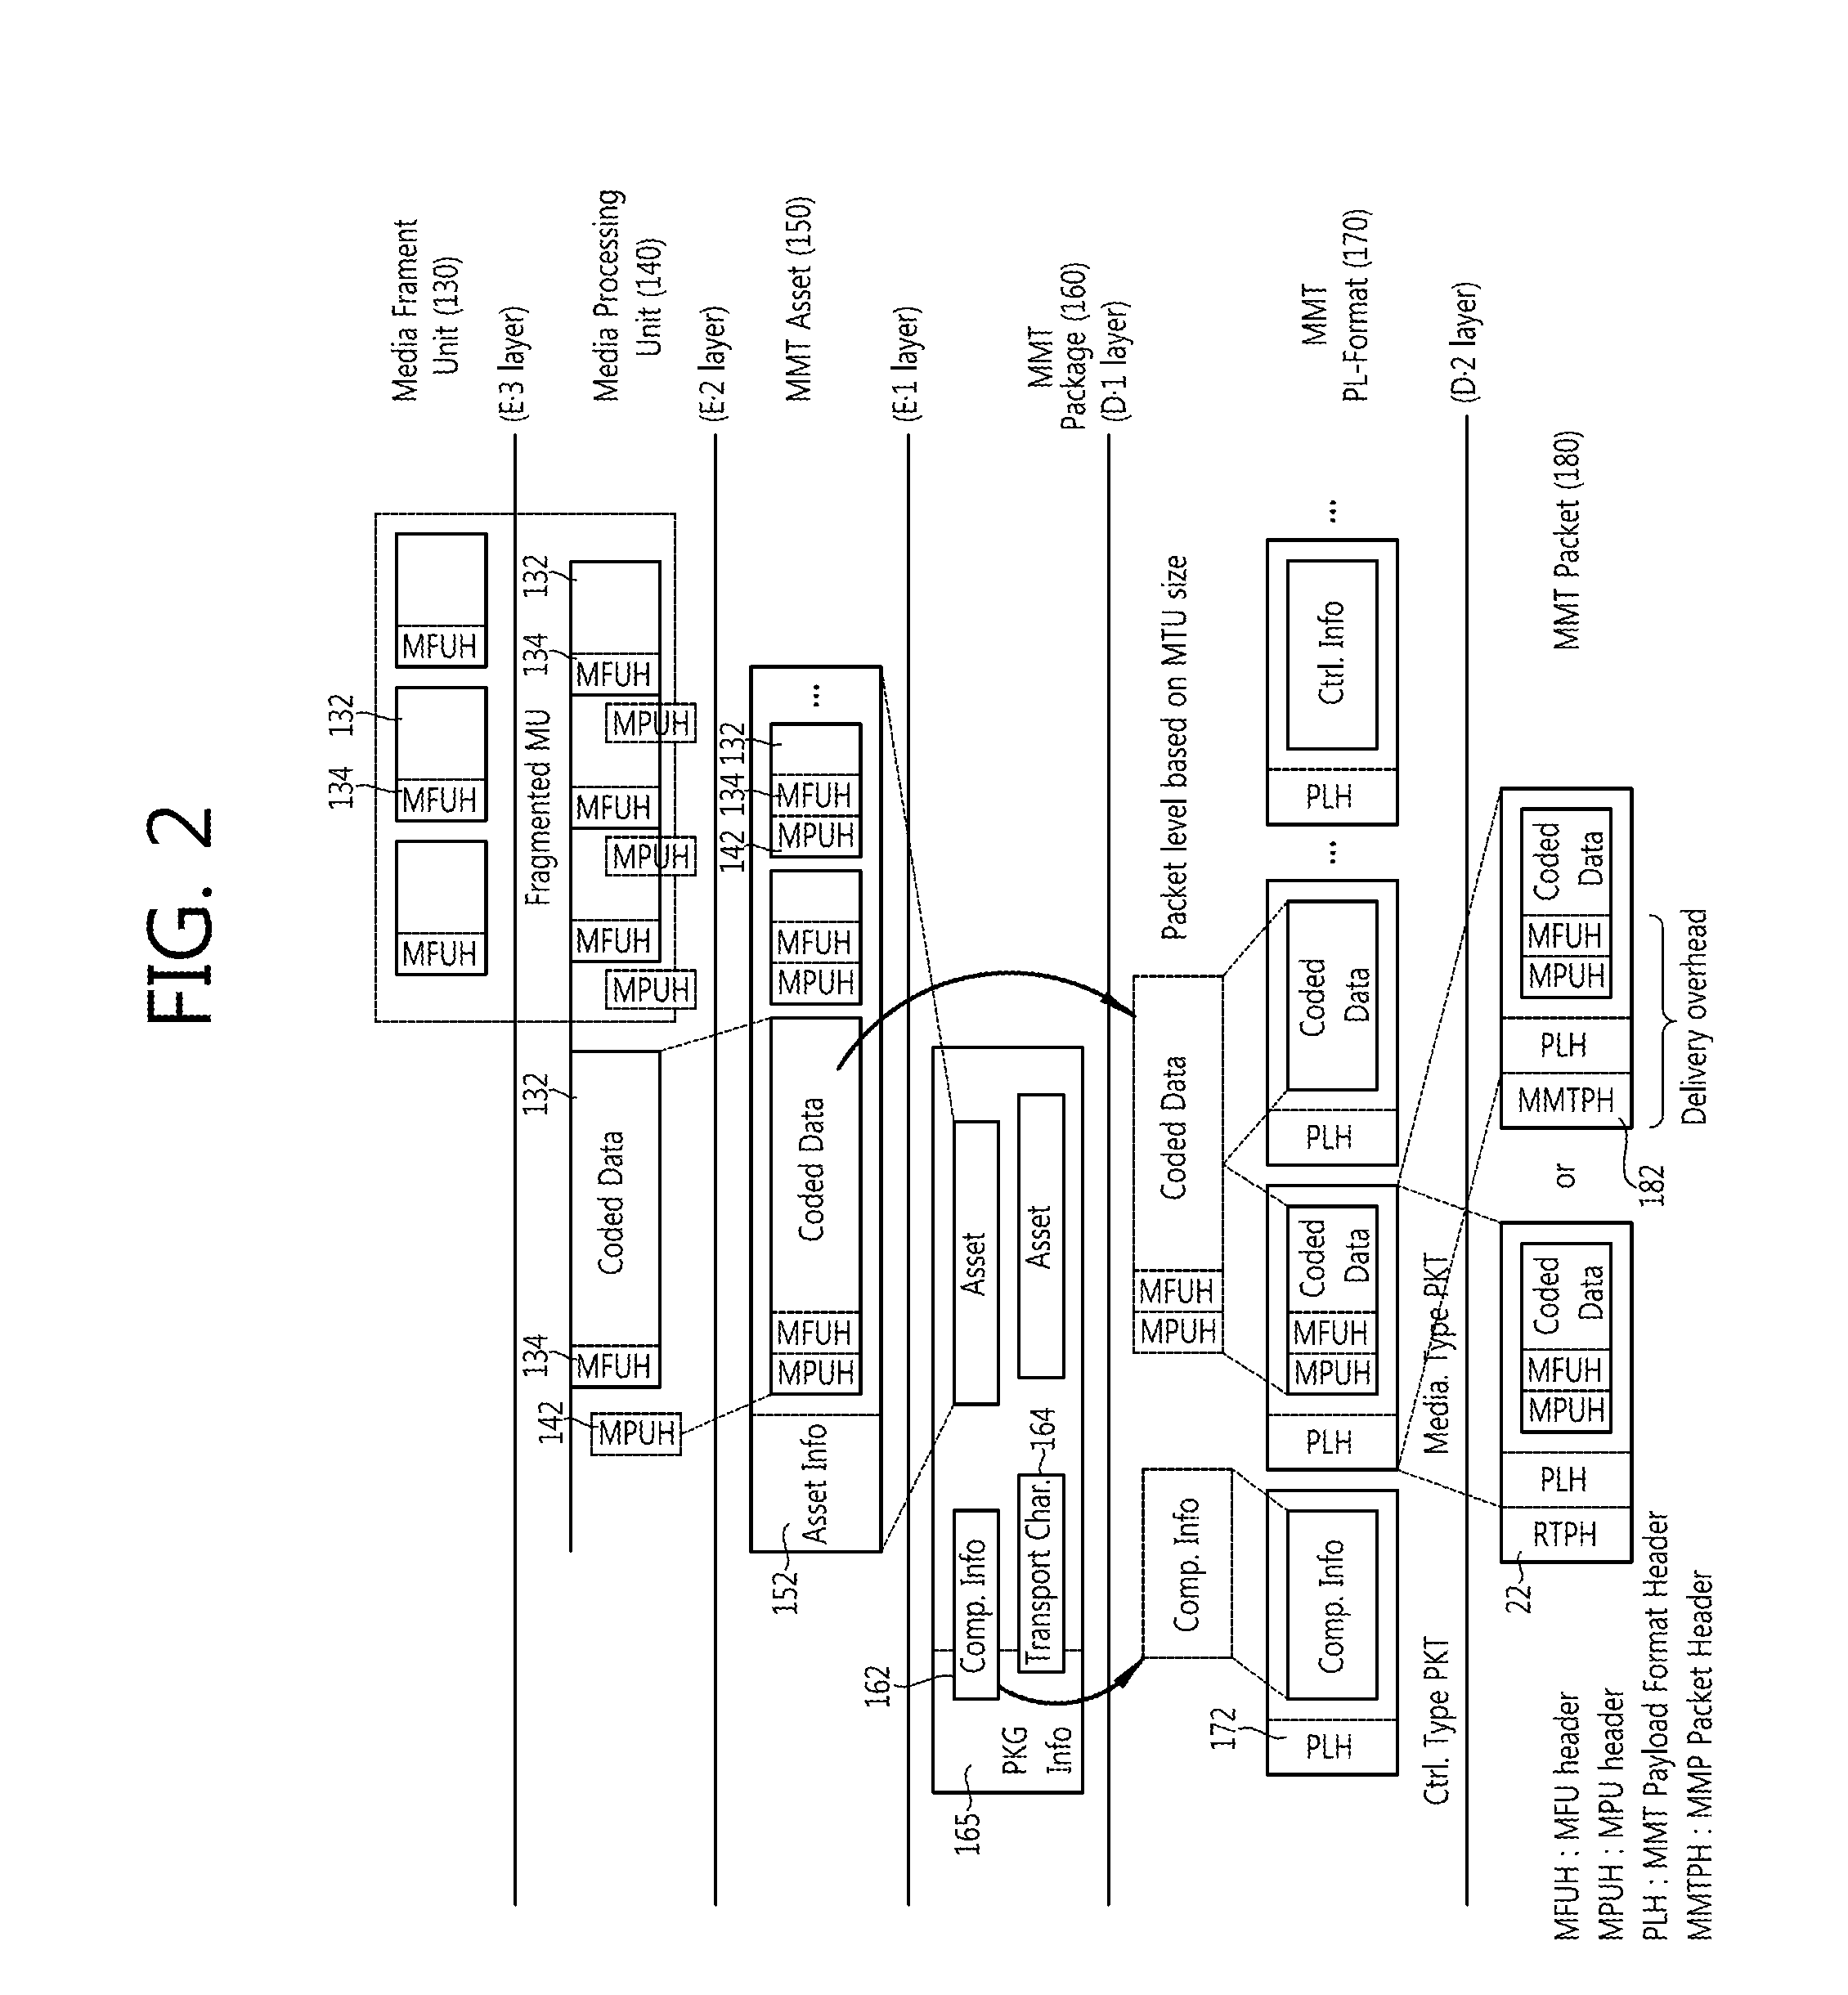 Method for hybrid delivery of mmt package and content and method for receiving content